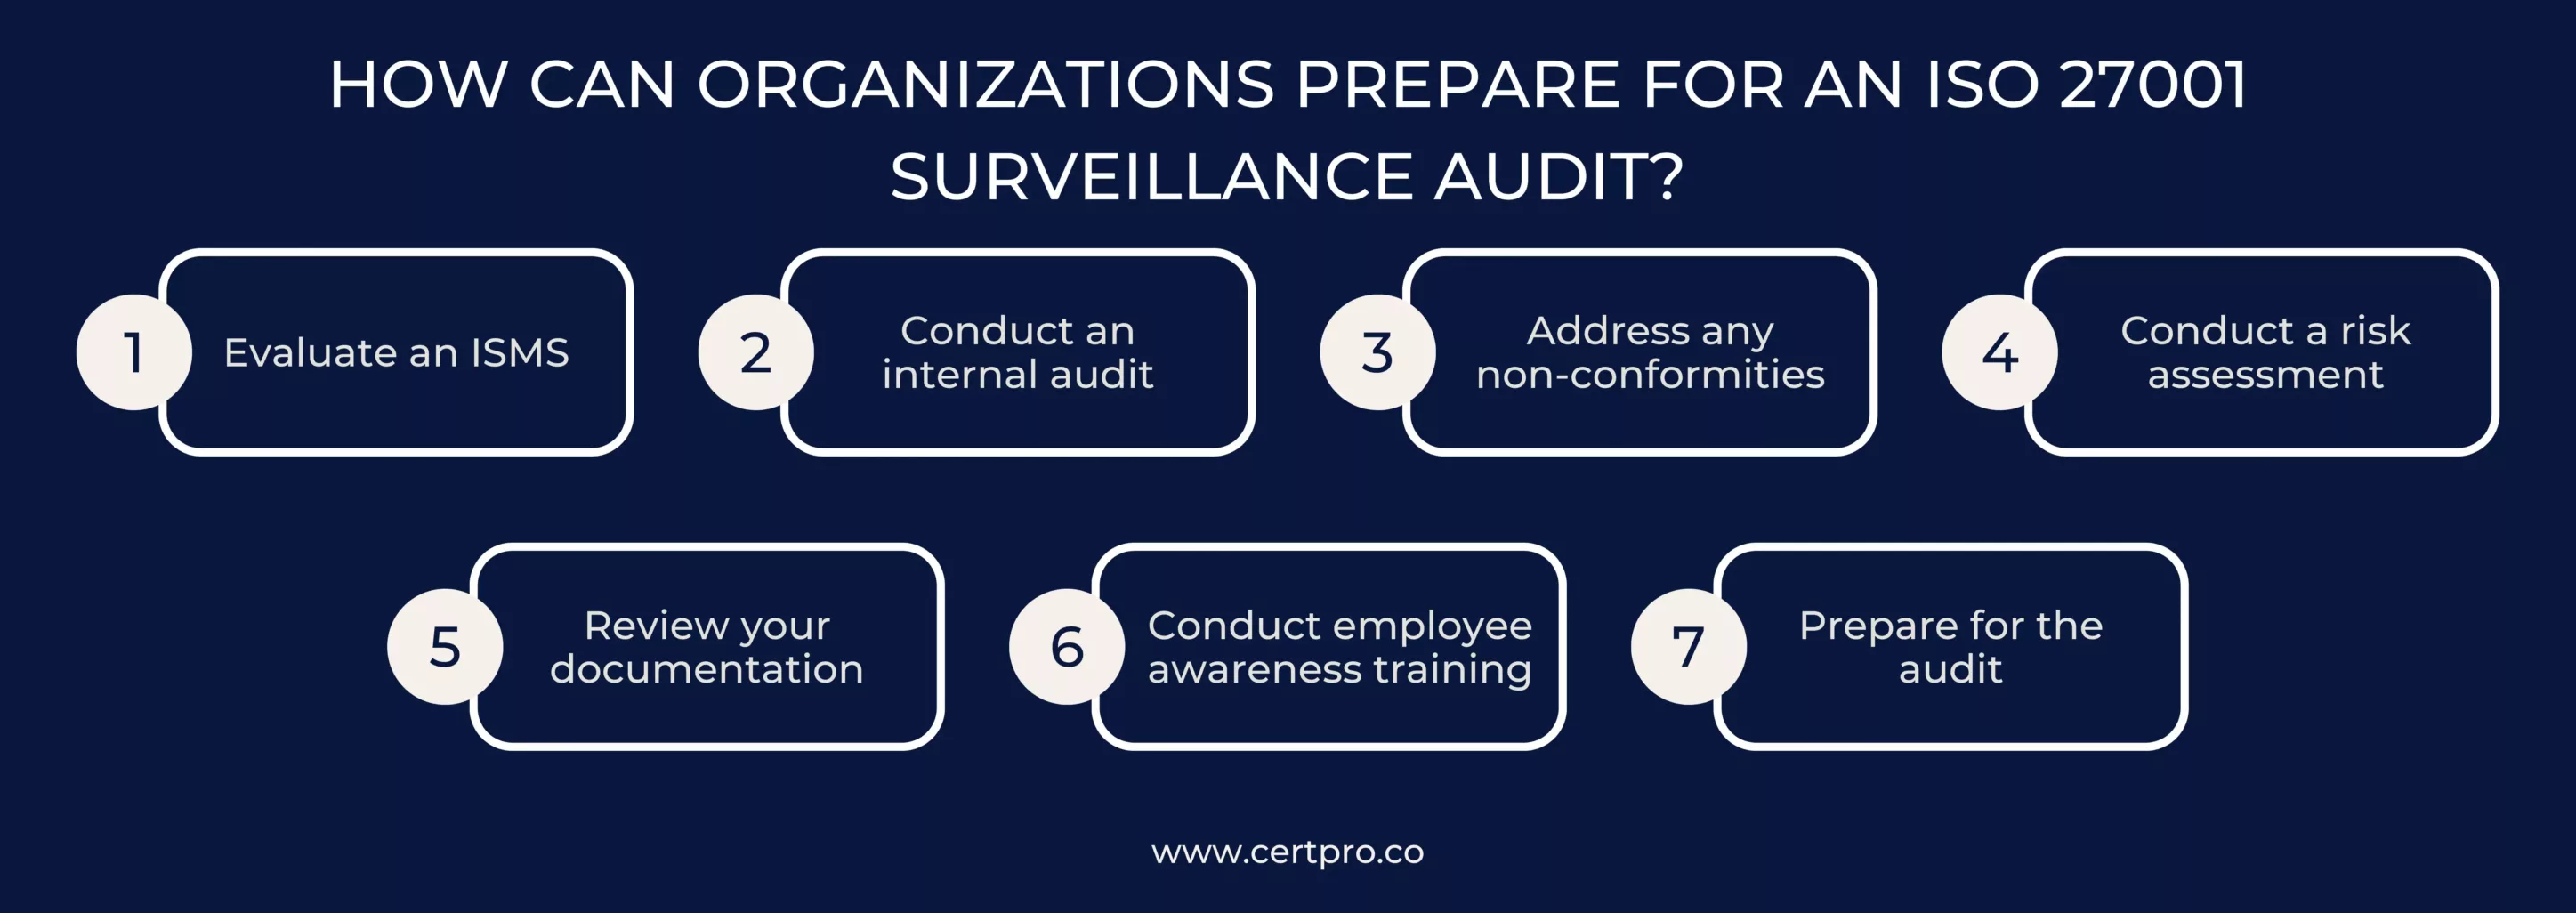 how can organization prepare for ISO 27001 surveillance